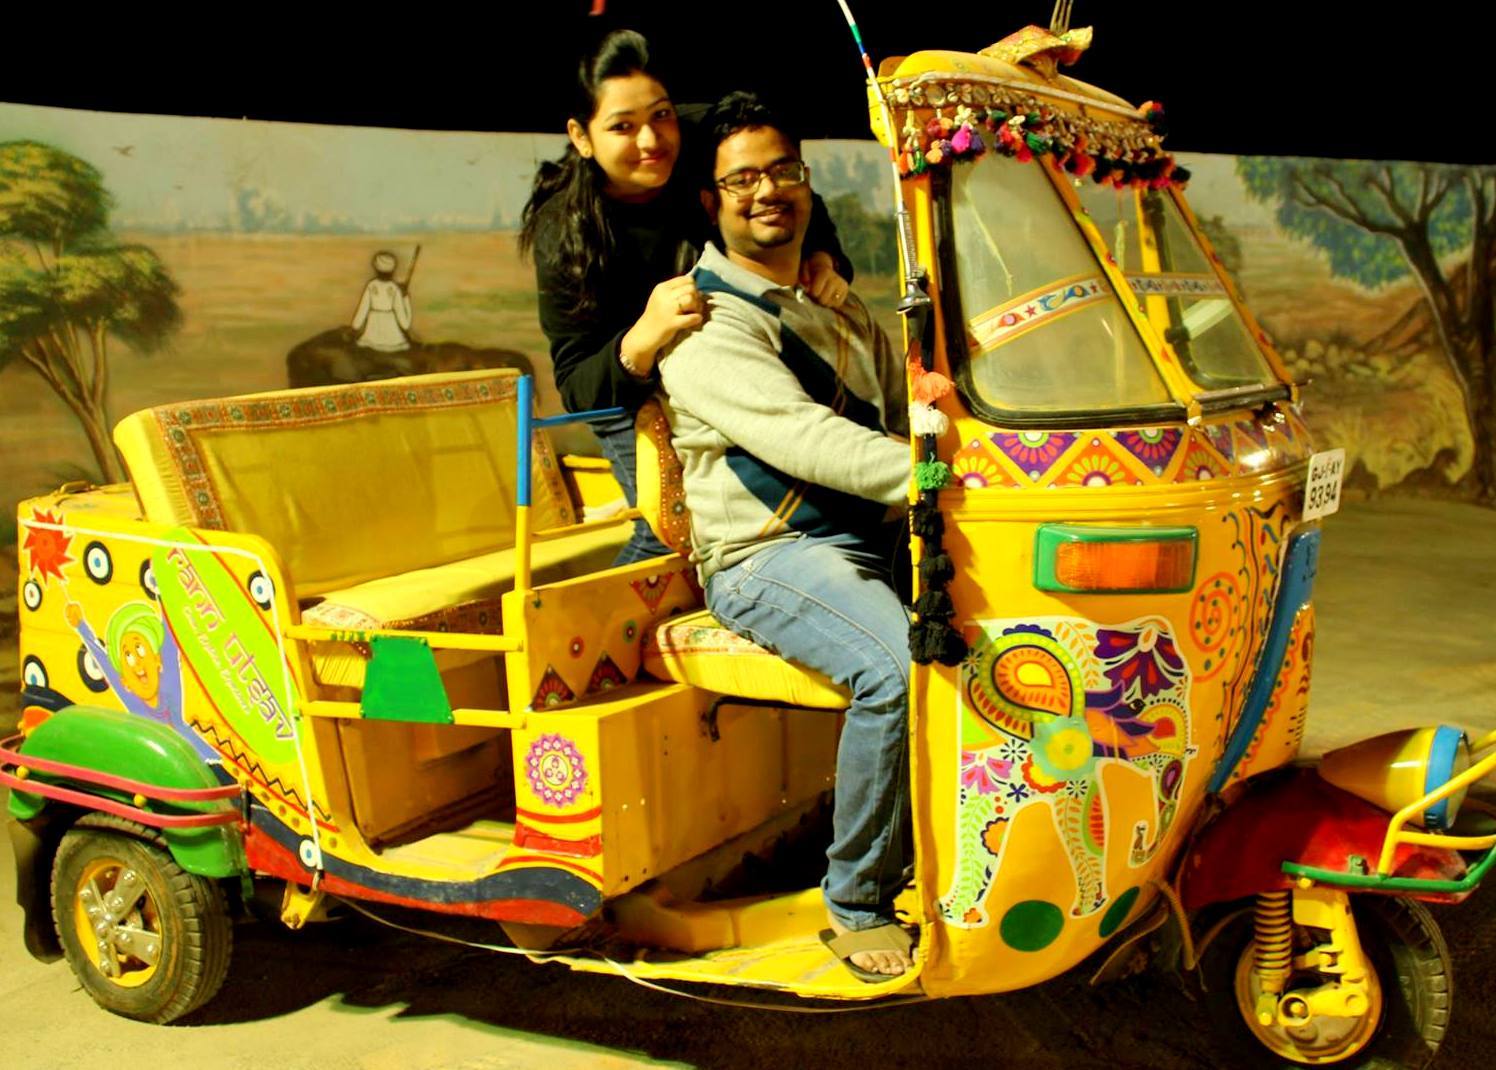 Lucknow Meri Nazar Se, A Blogger Couple’s Perspective on the City of Lucknow